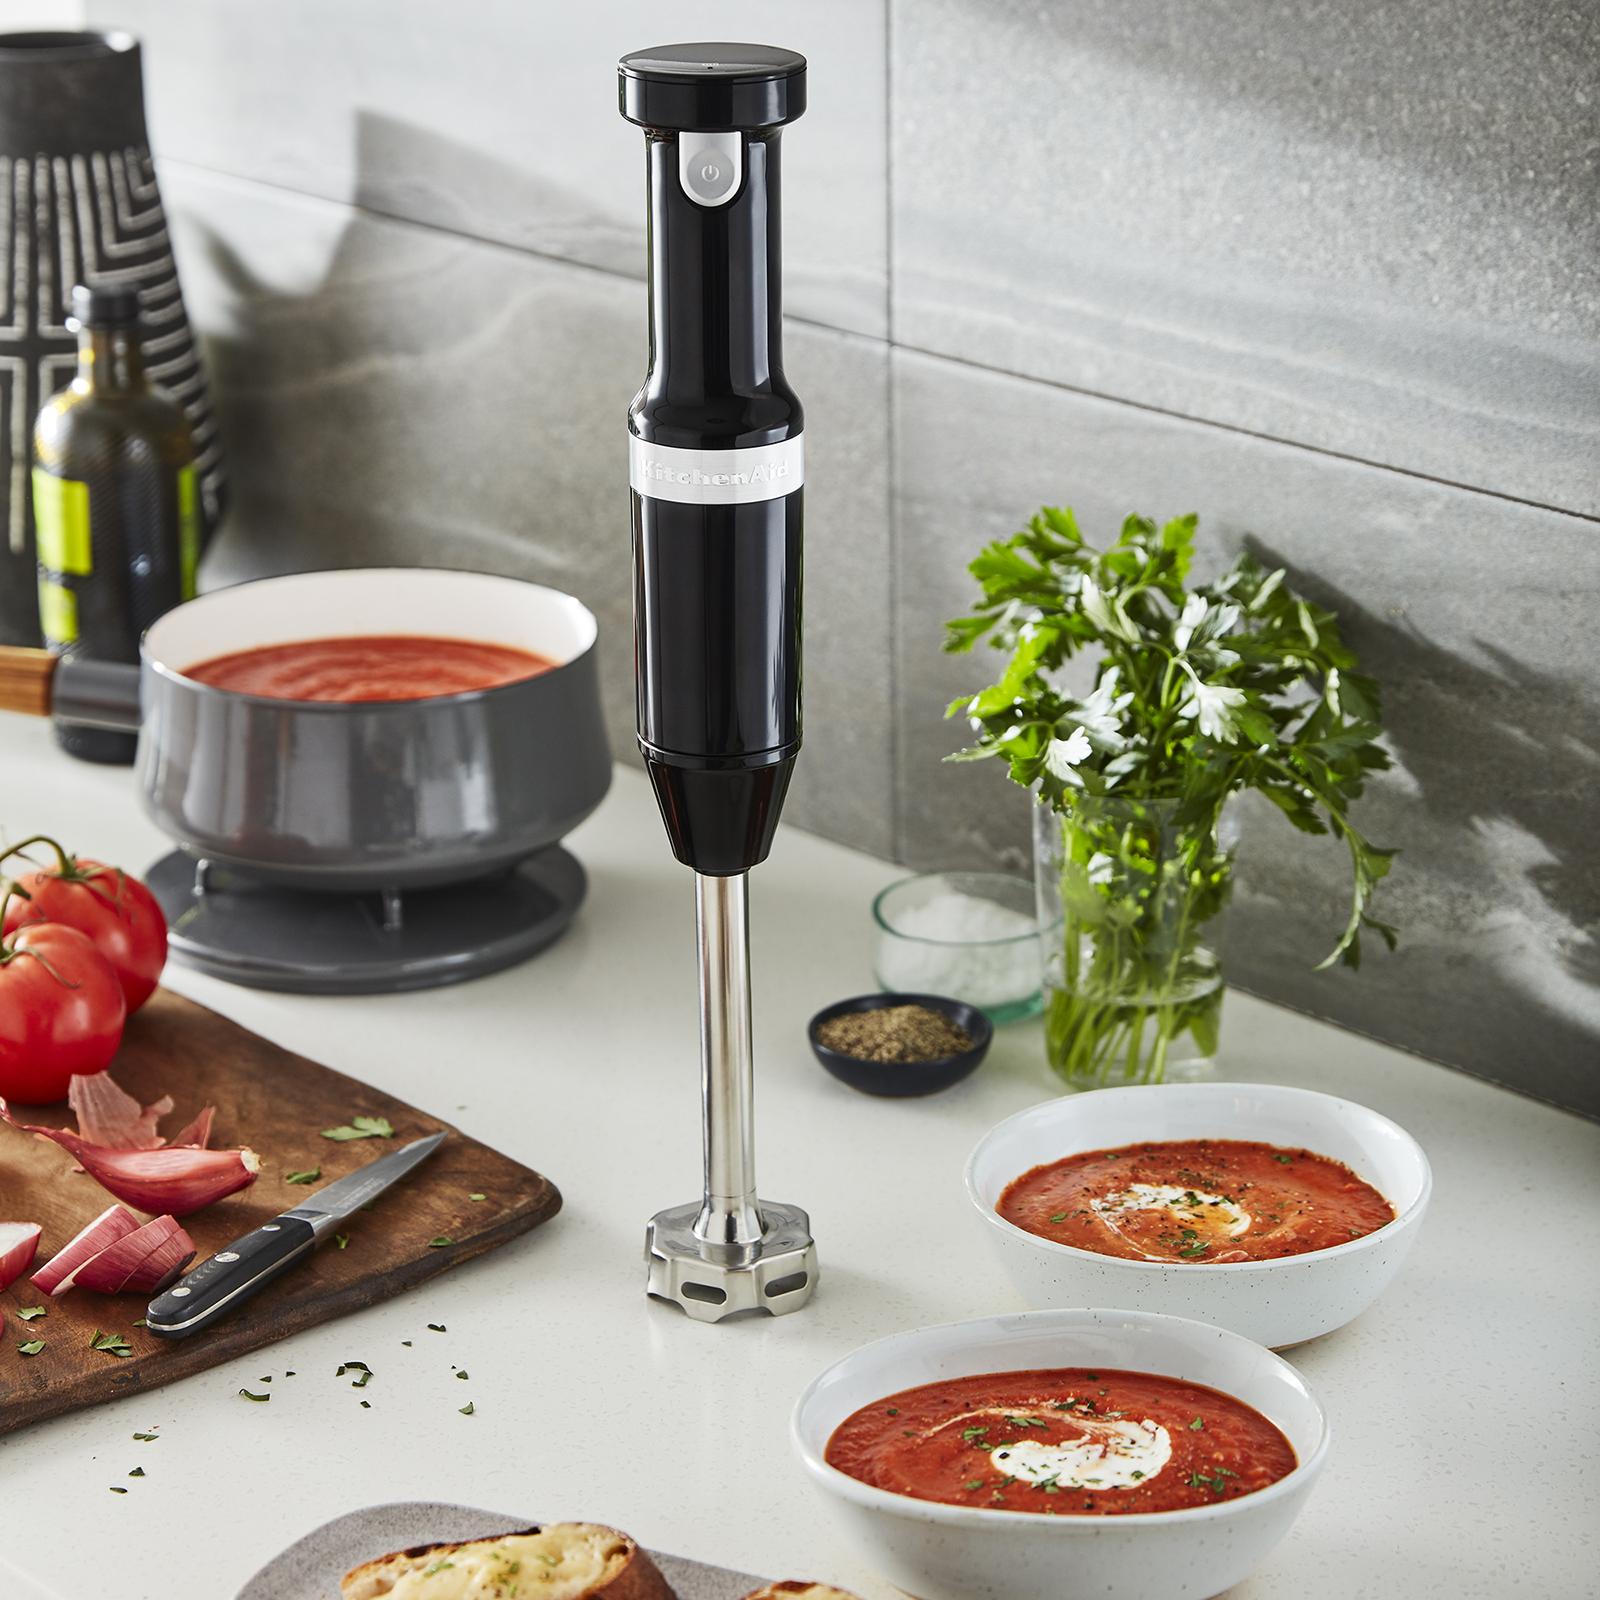 KitchenAid, Cordless Immersion Blender and Accessories Set